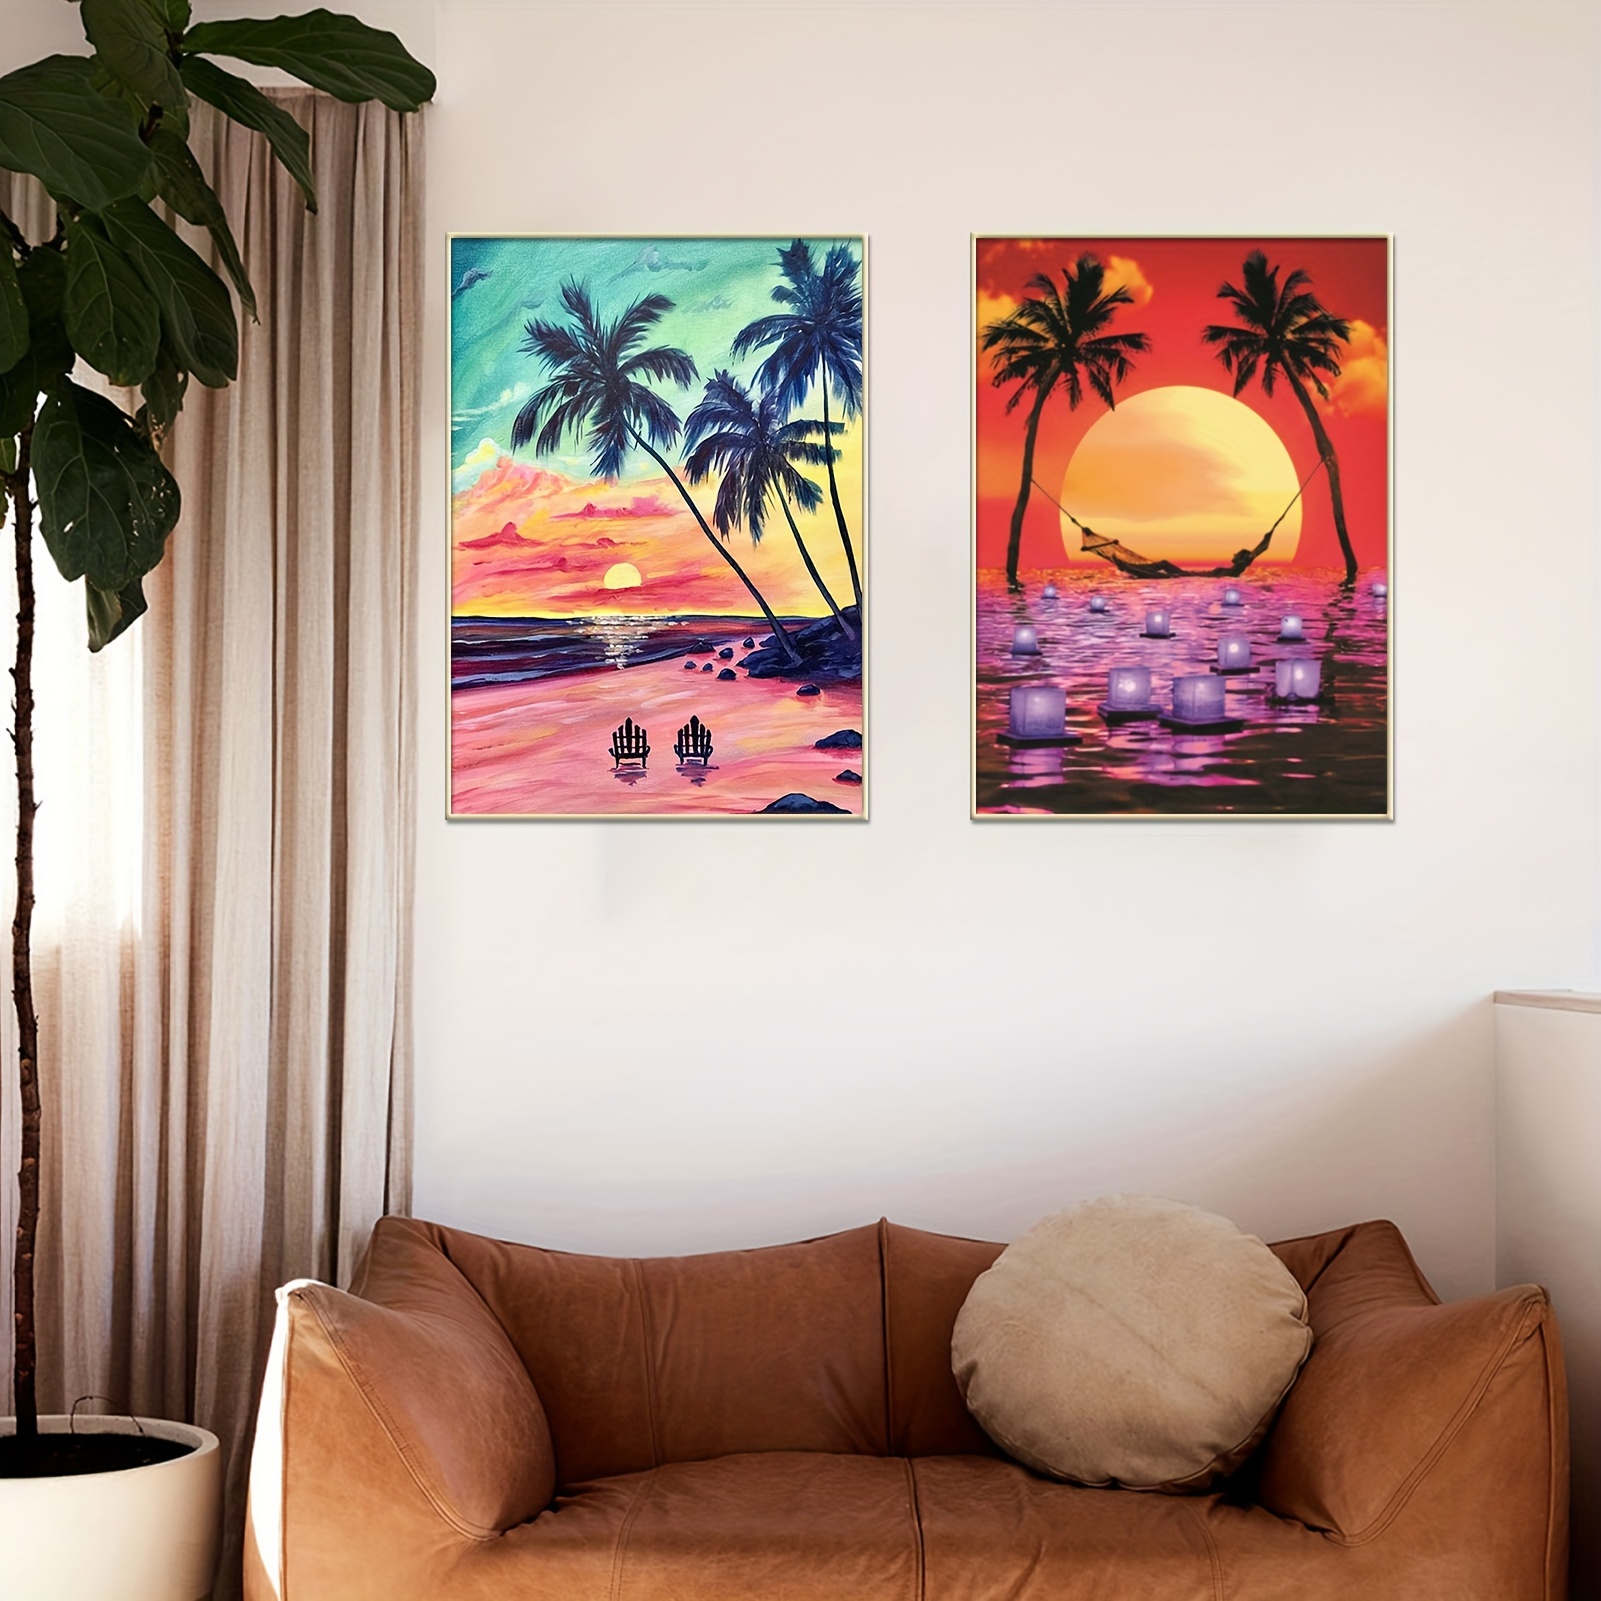 New Large Size Diamond Painting 5D DIY Beach Landscape Decorative Painting  Frameless Living Room Bedroom Decoration Gift Painting 40*70cm/15.7*27.5in